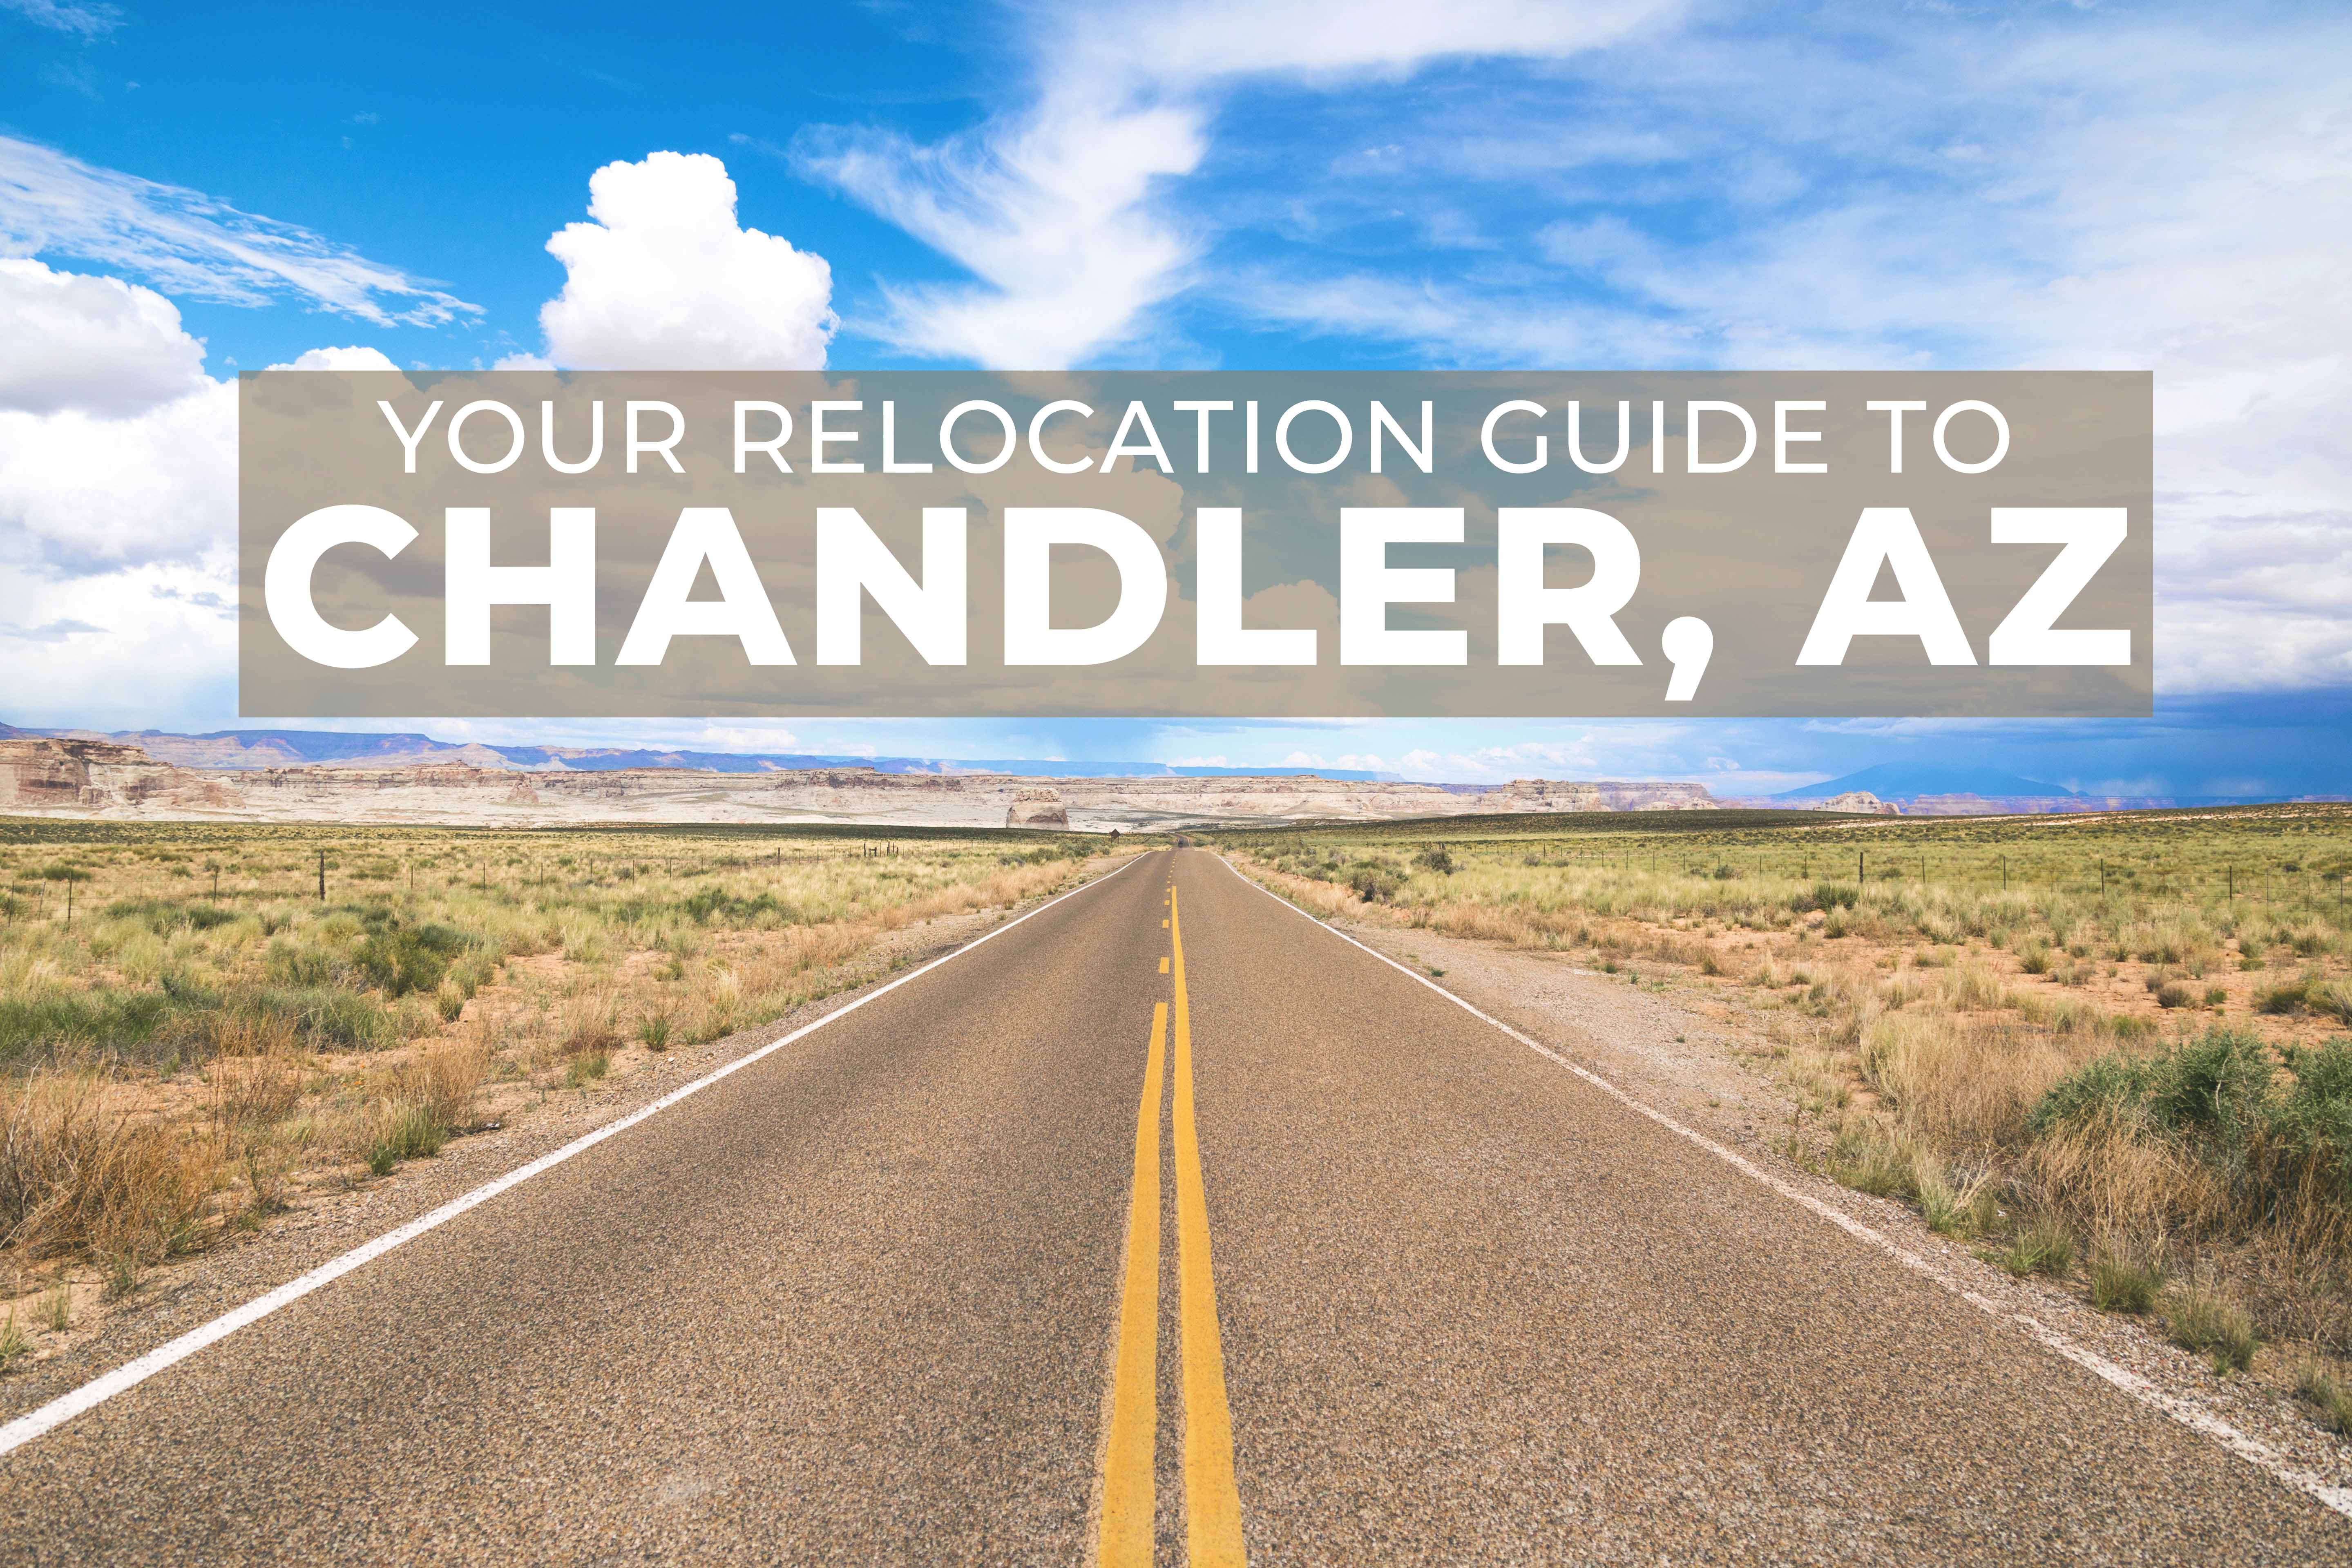 Your Relocation Guide to Chandler, AZ